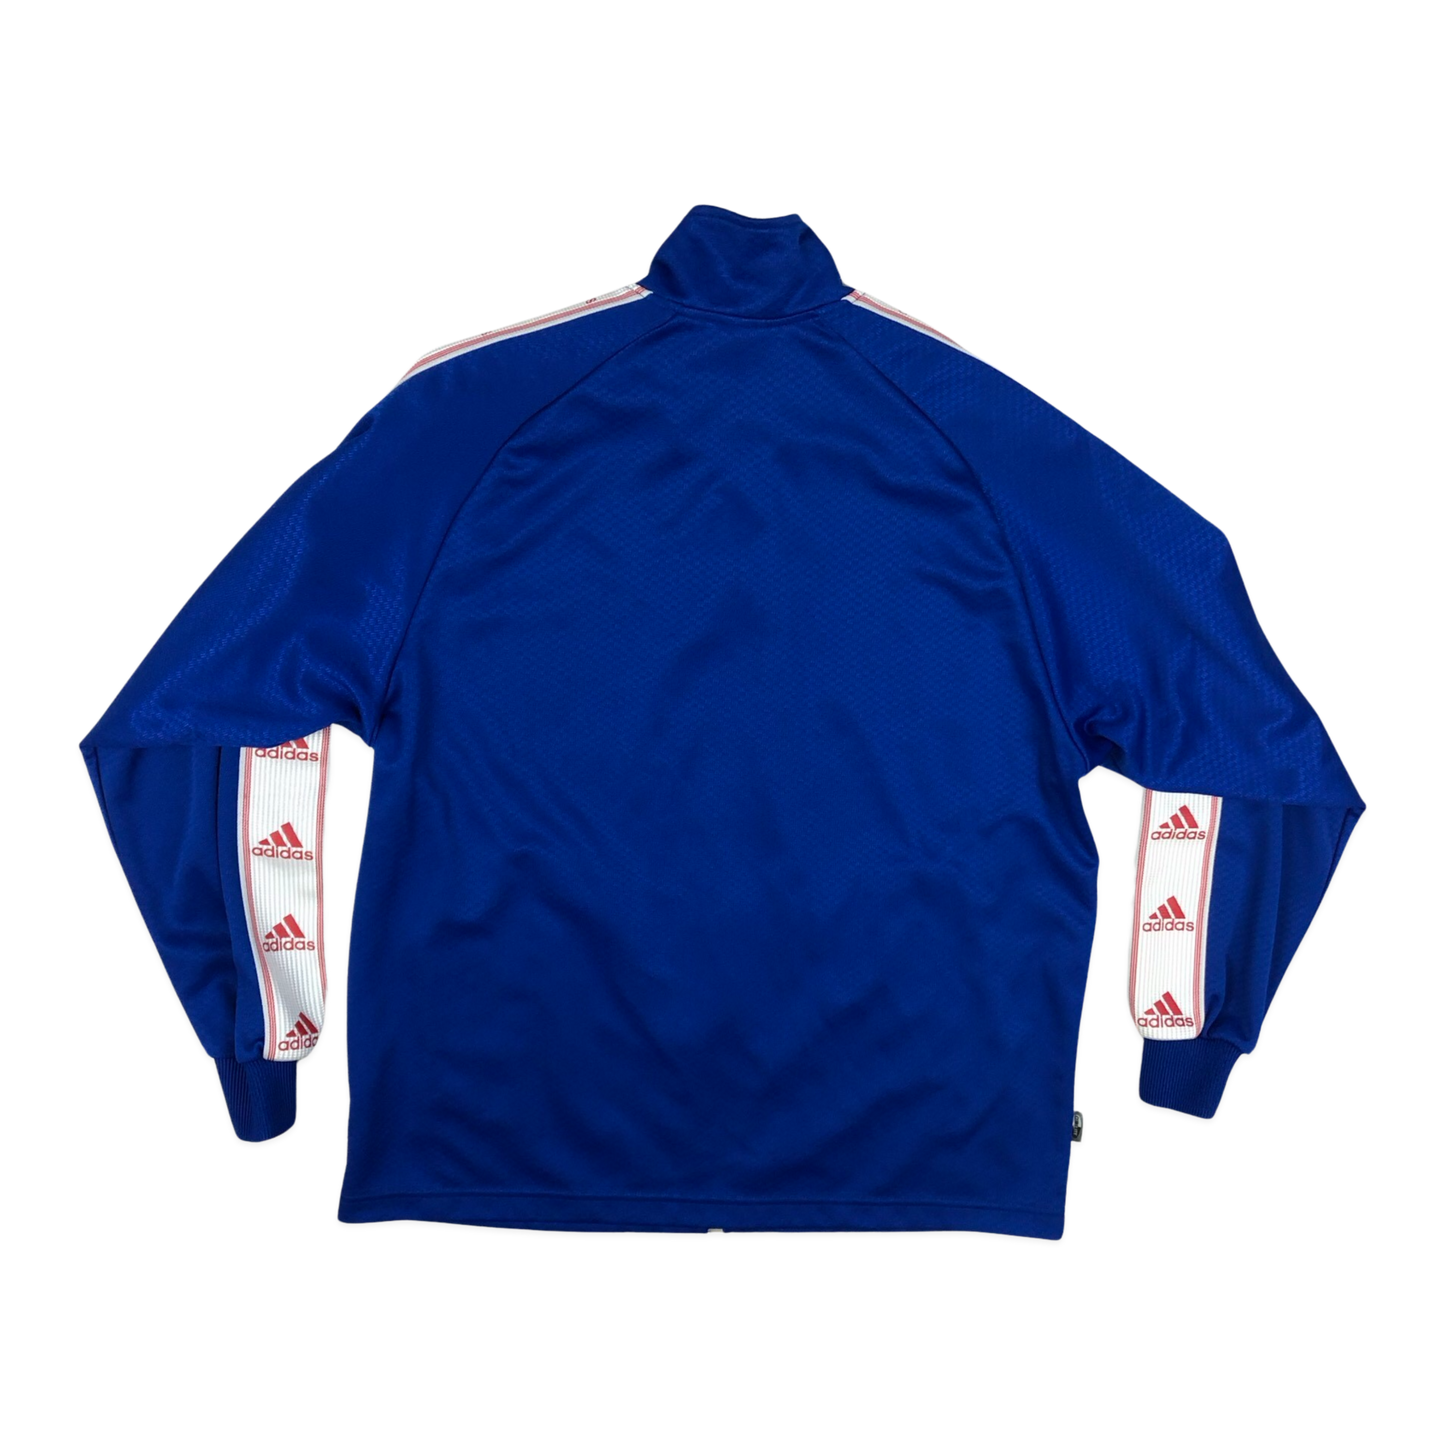 Vintage 00s Adidas Blue and White Track Jacket XL